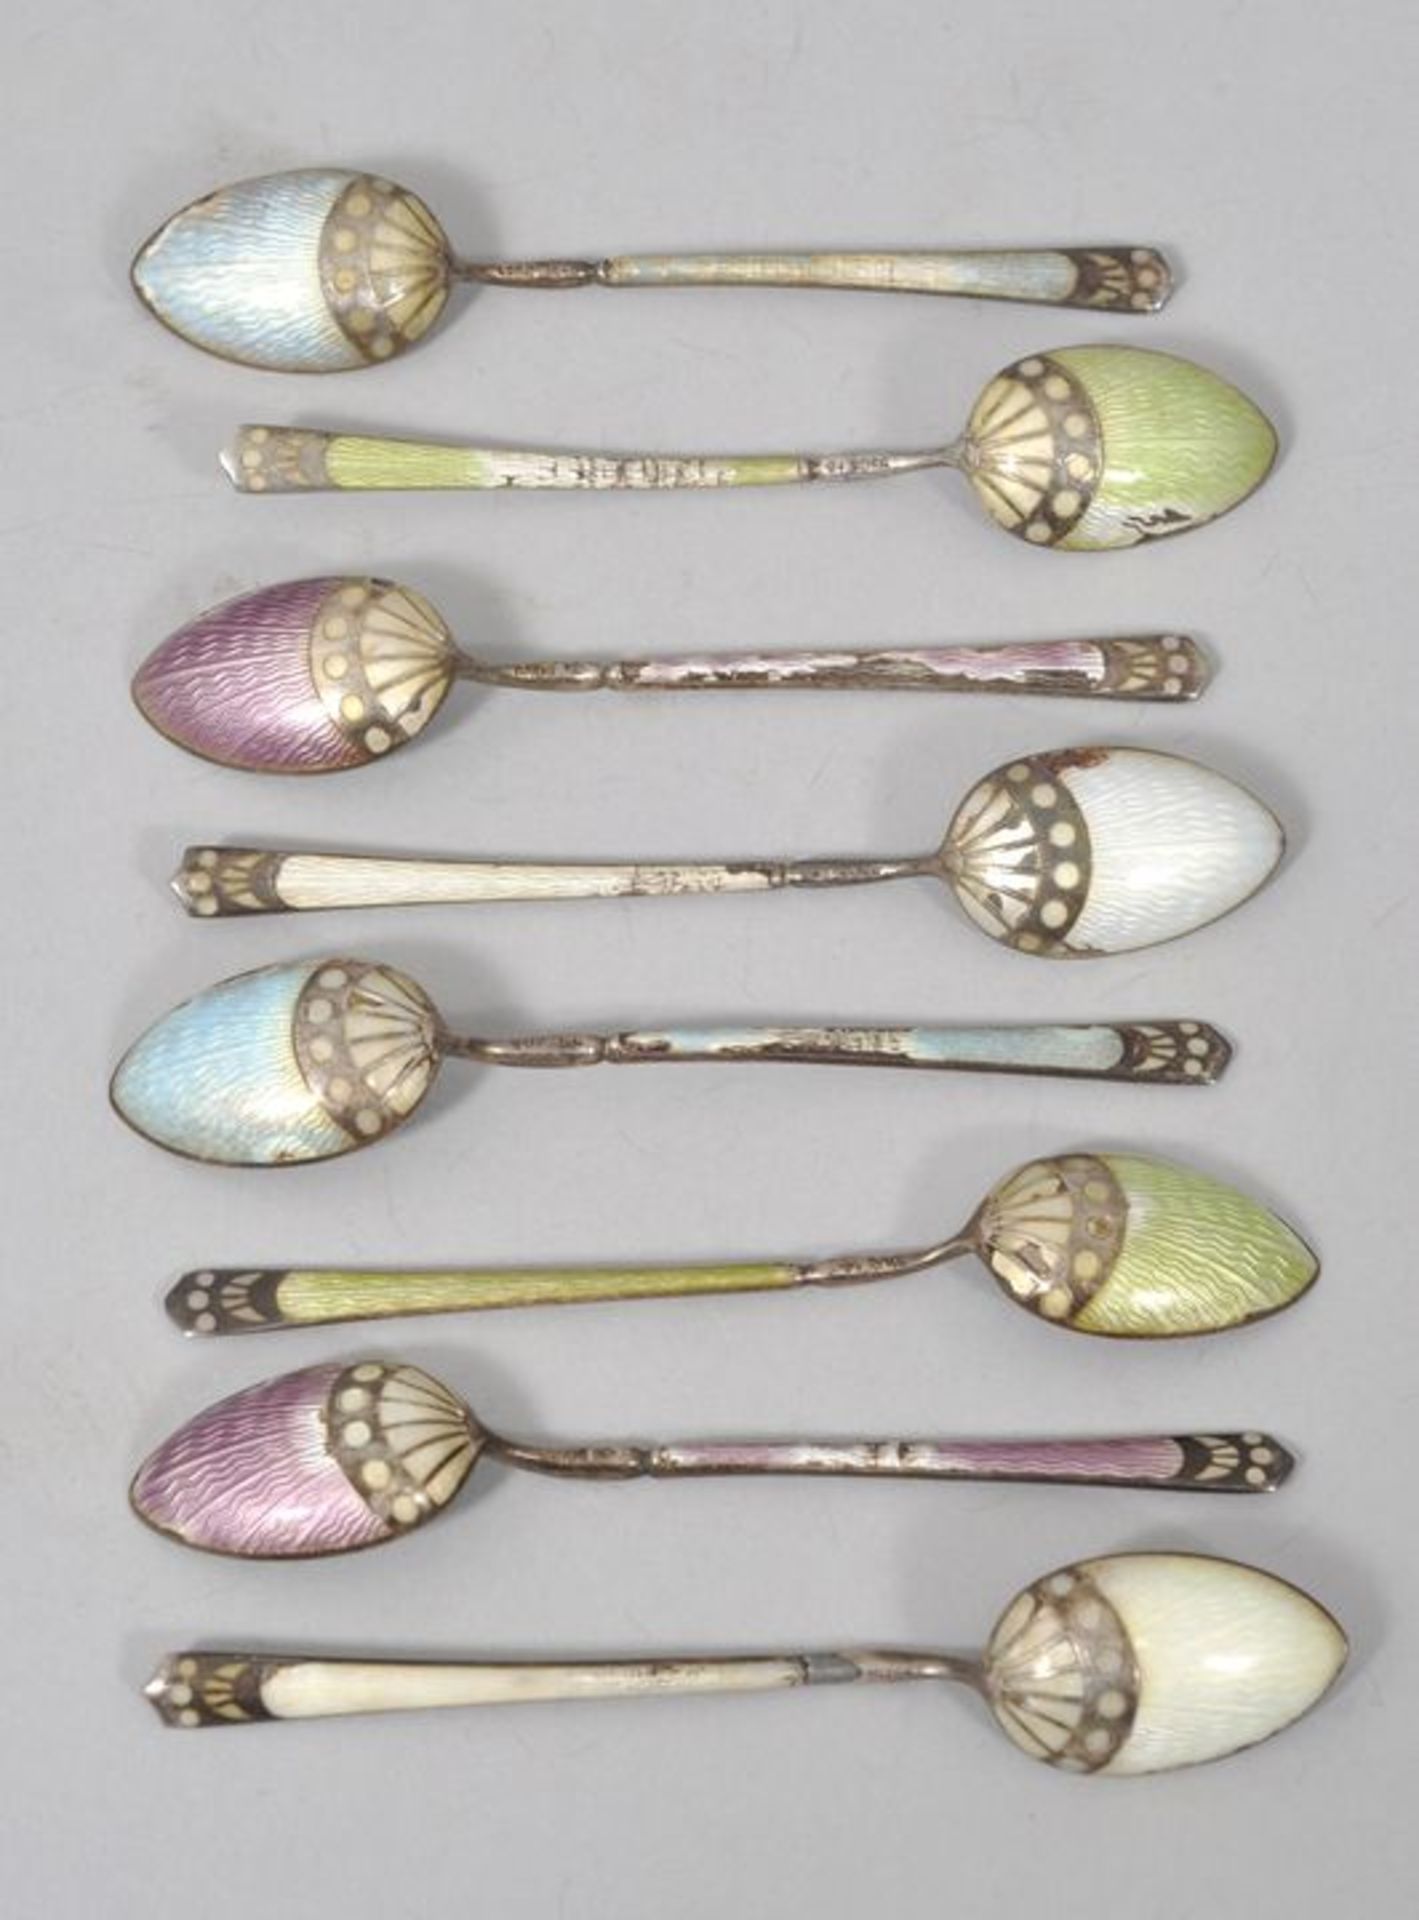 Löffel, Emaille / Spoons